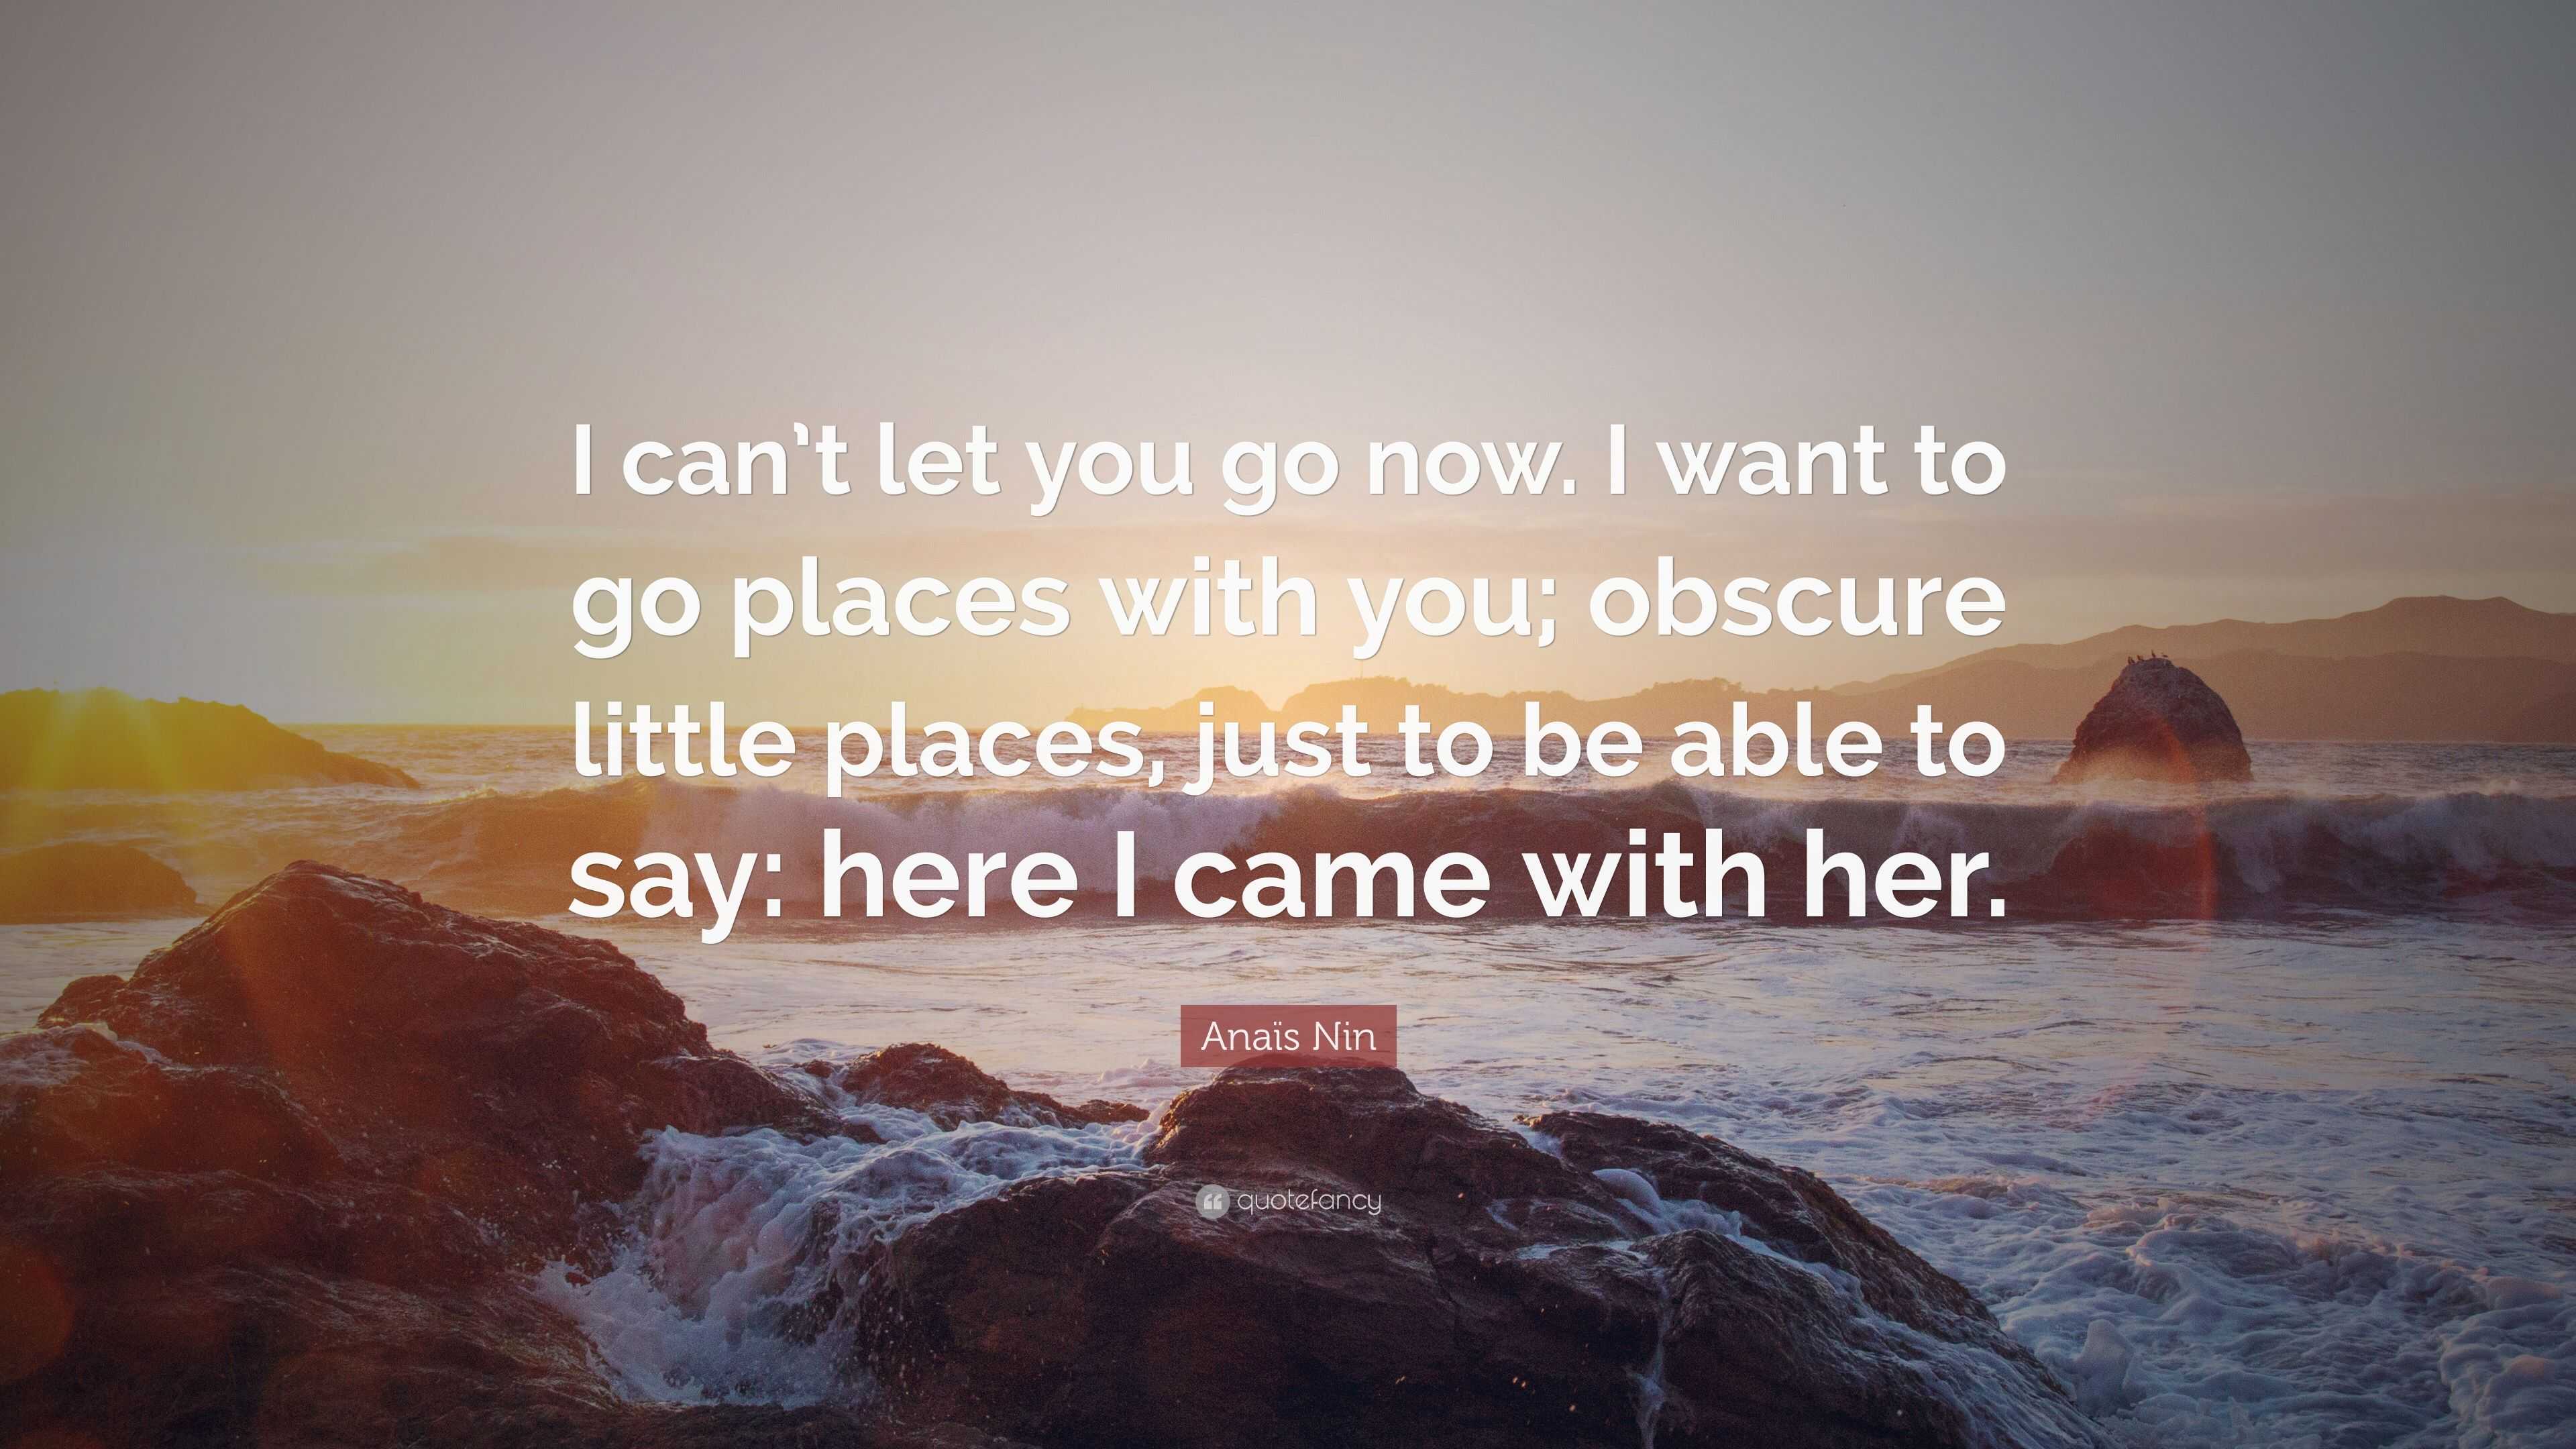 Anaïs Nin Quote: “I can’t let you go now. I want to go ...